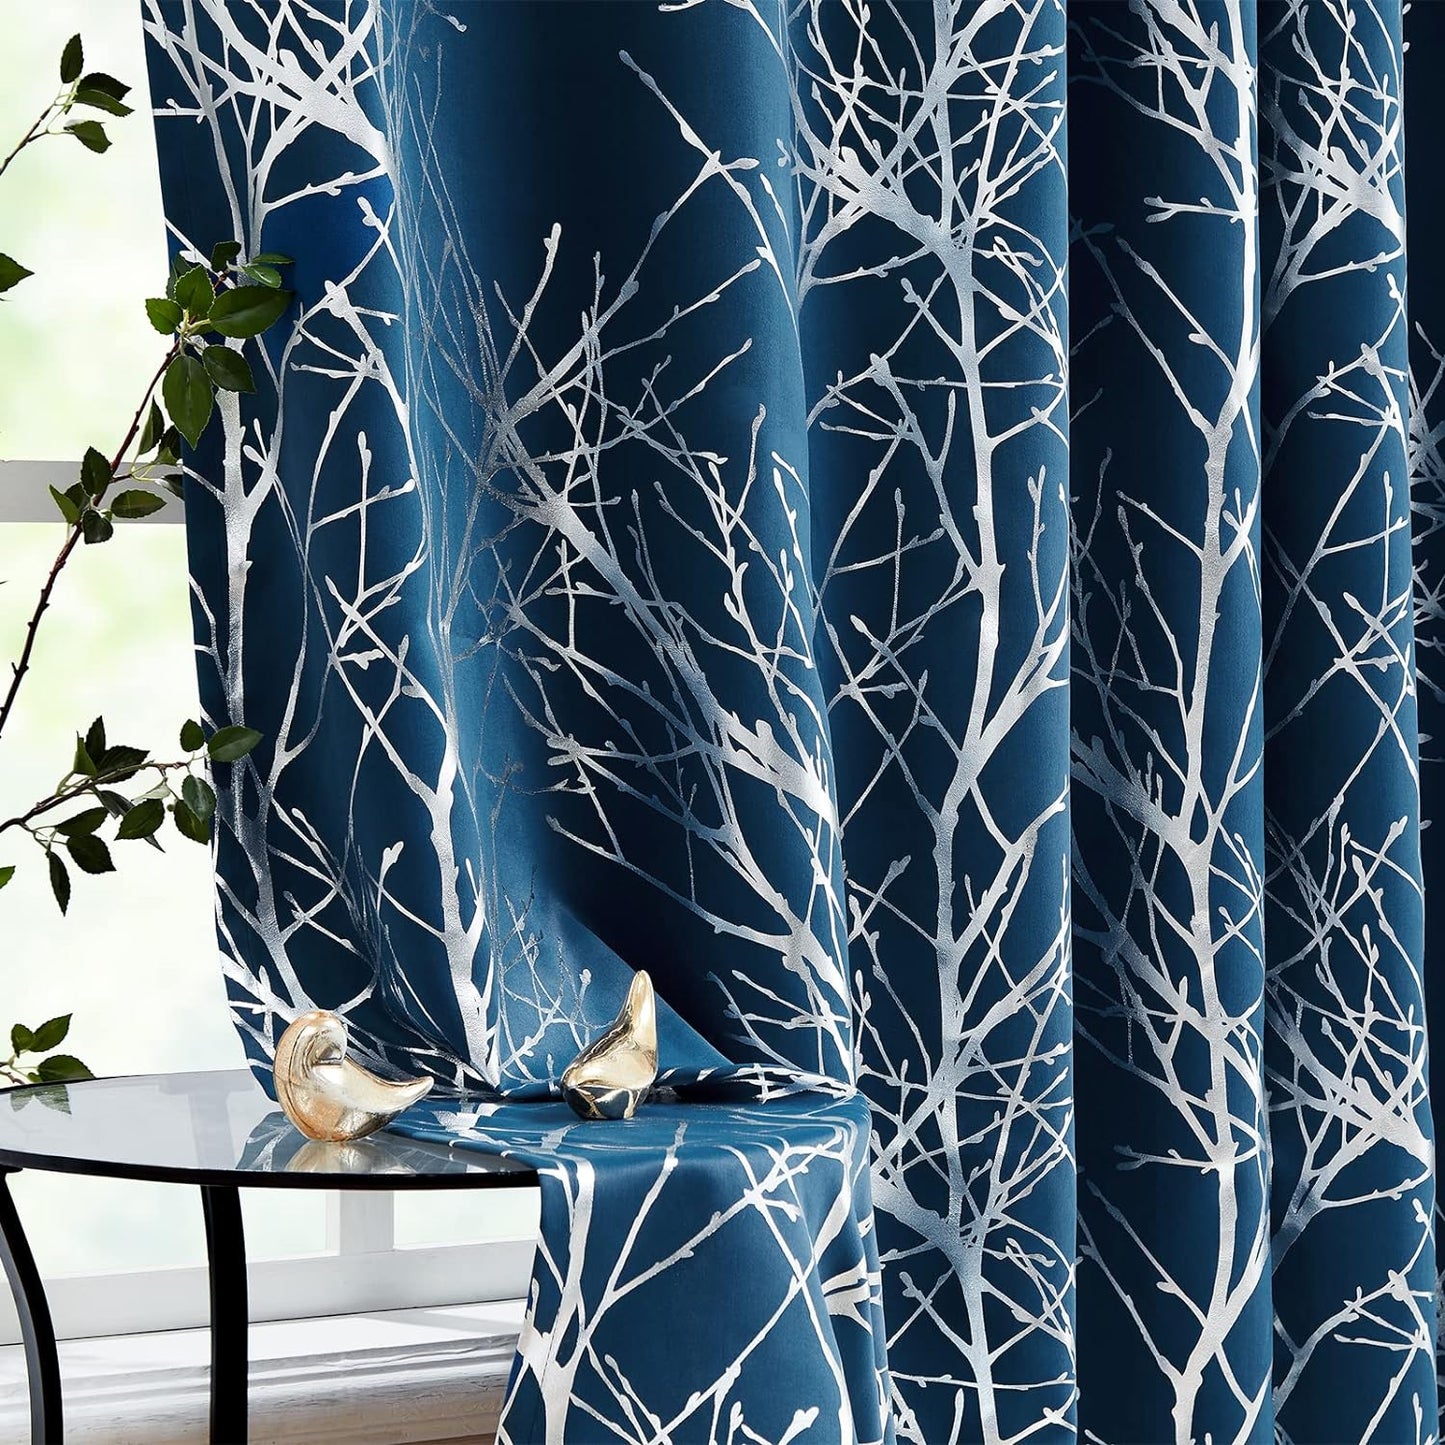 FMFUNCTEX Metallic Tree Blackout Curtains Bedroom Grey 84-Inch Living-Room Branch Print Curtain Panels Forest Triple Weave Thermal Insulated Drapes for Windows Dorm Hotel Grommet Top, 2Panels  Fmfunctex Silver /Navy Blue 50"W X 63"L 2Pcs 